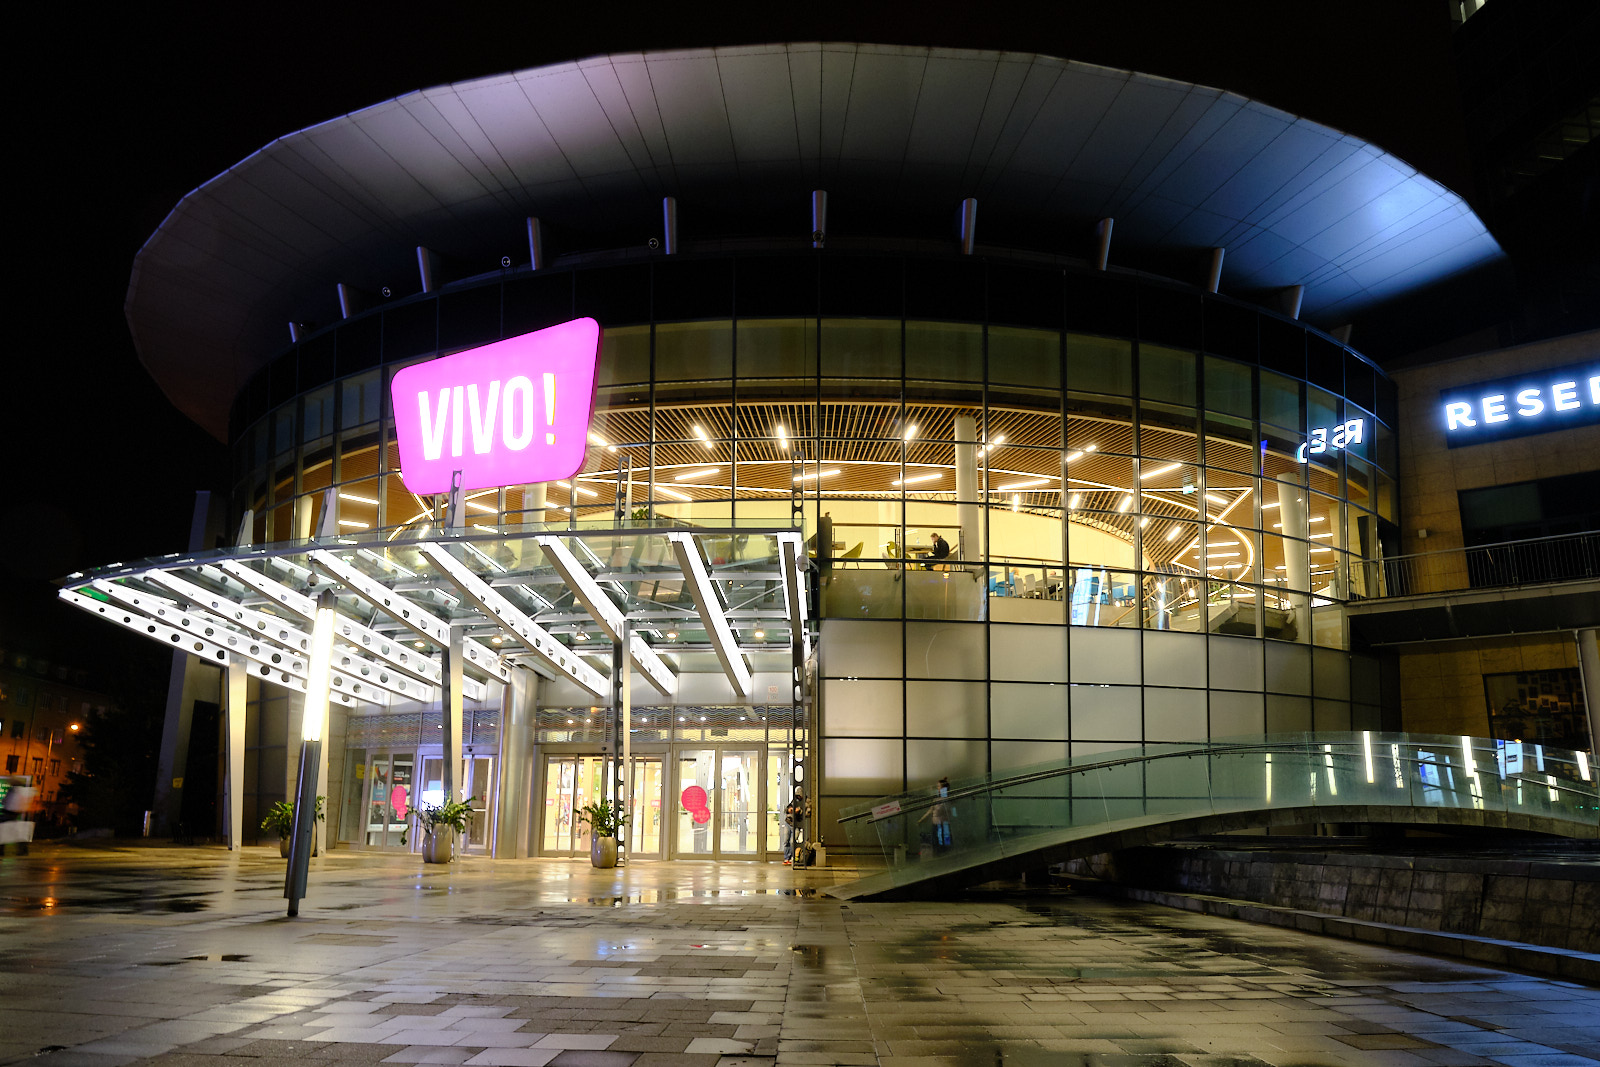 Design and supply of LED luminaires for foodcourt and corridors in VIVO! shopping center